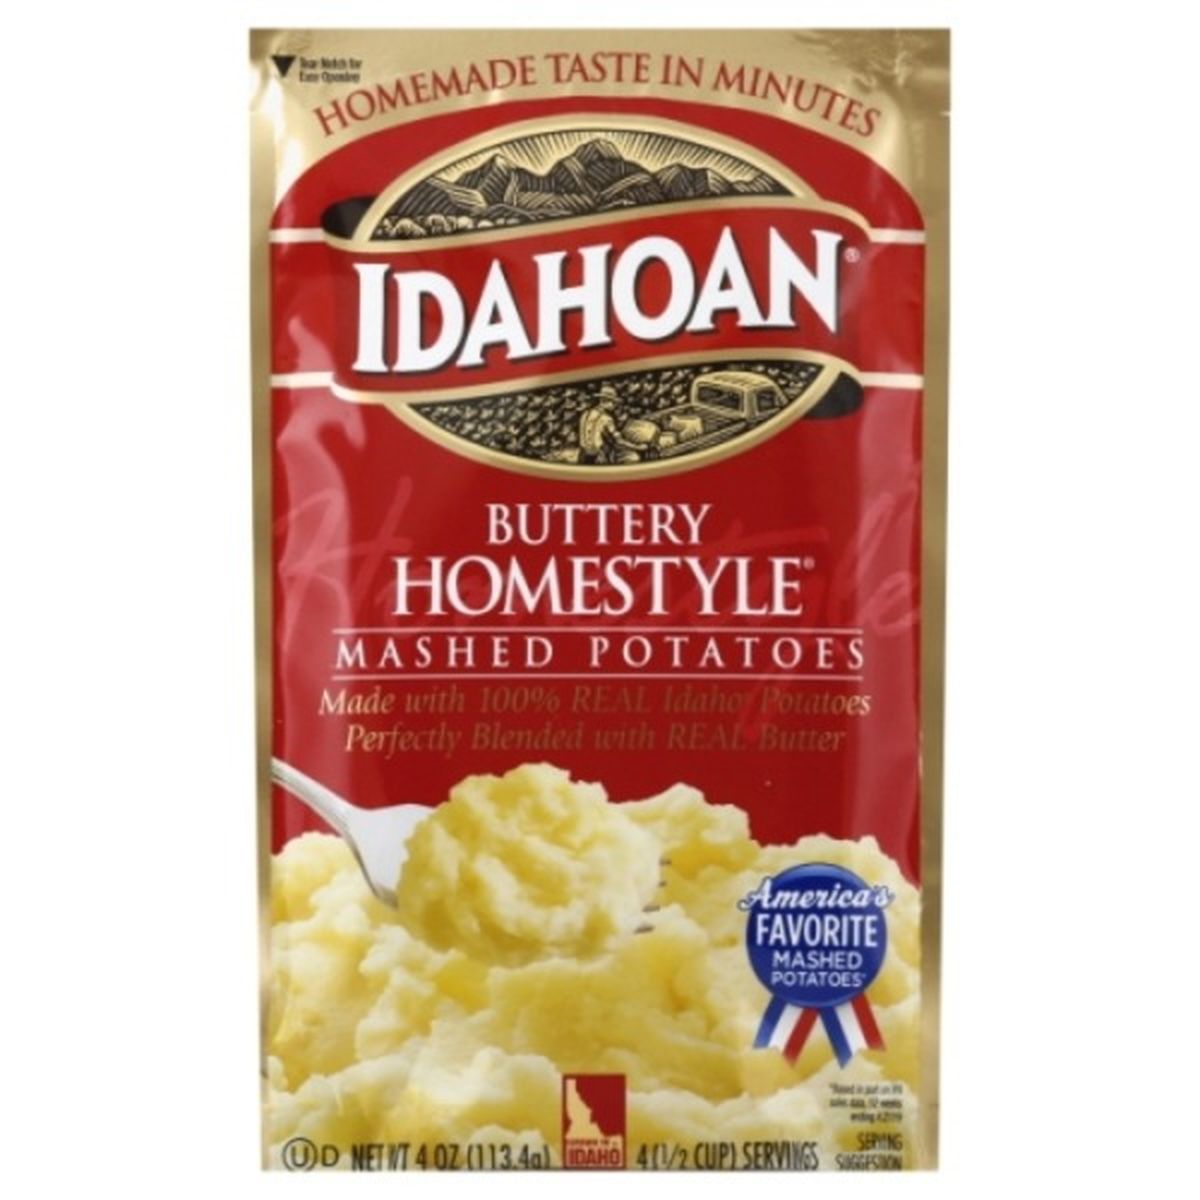 Calories in Idahoan Mashed Potatoes, Buttery Homestyle